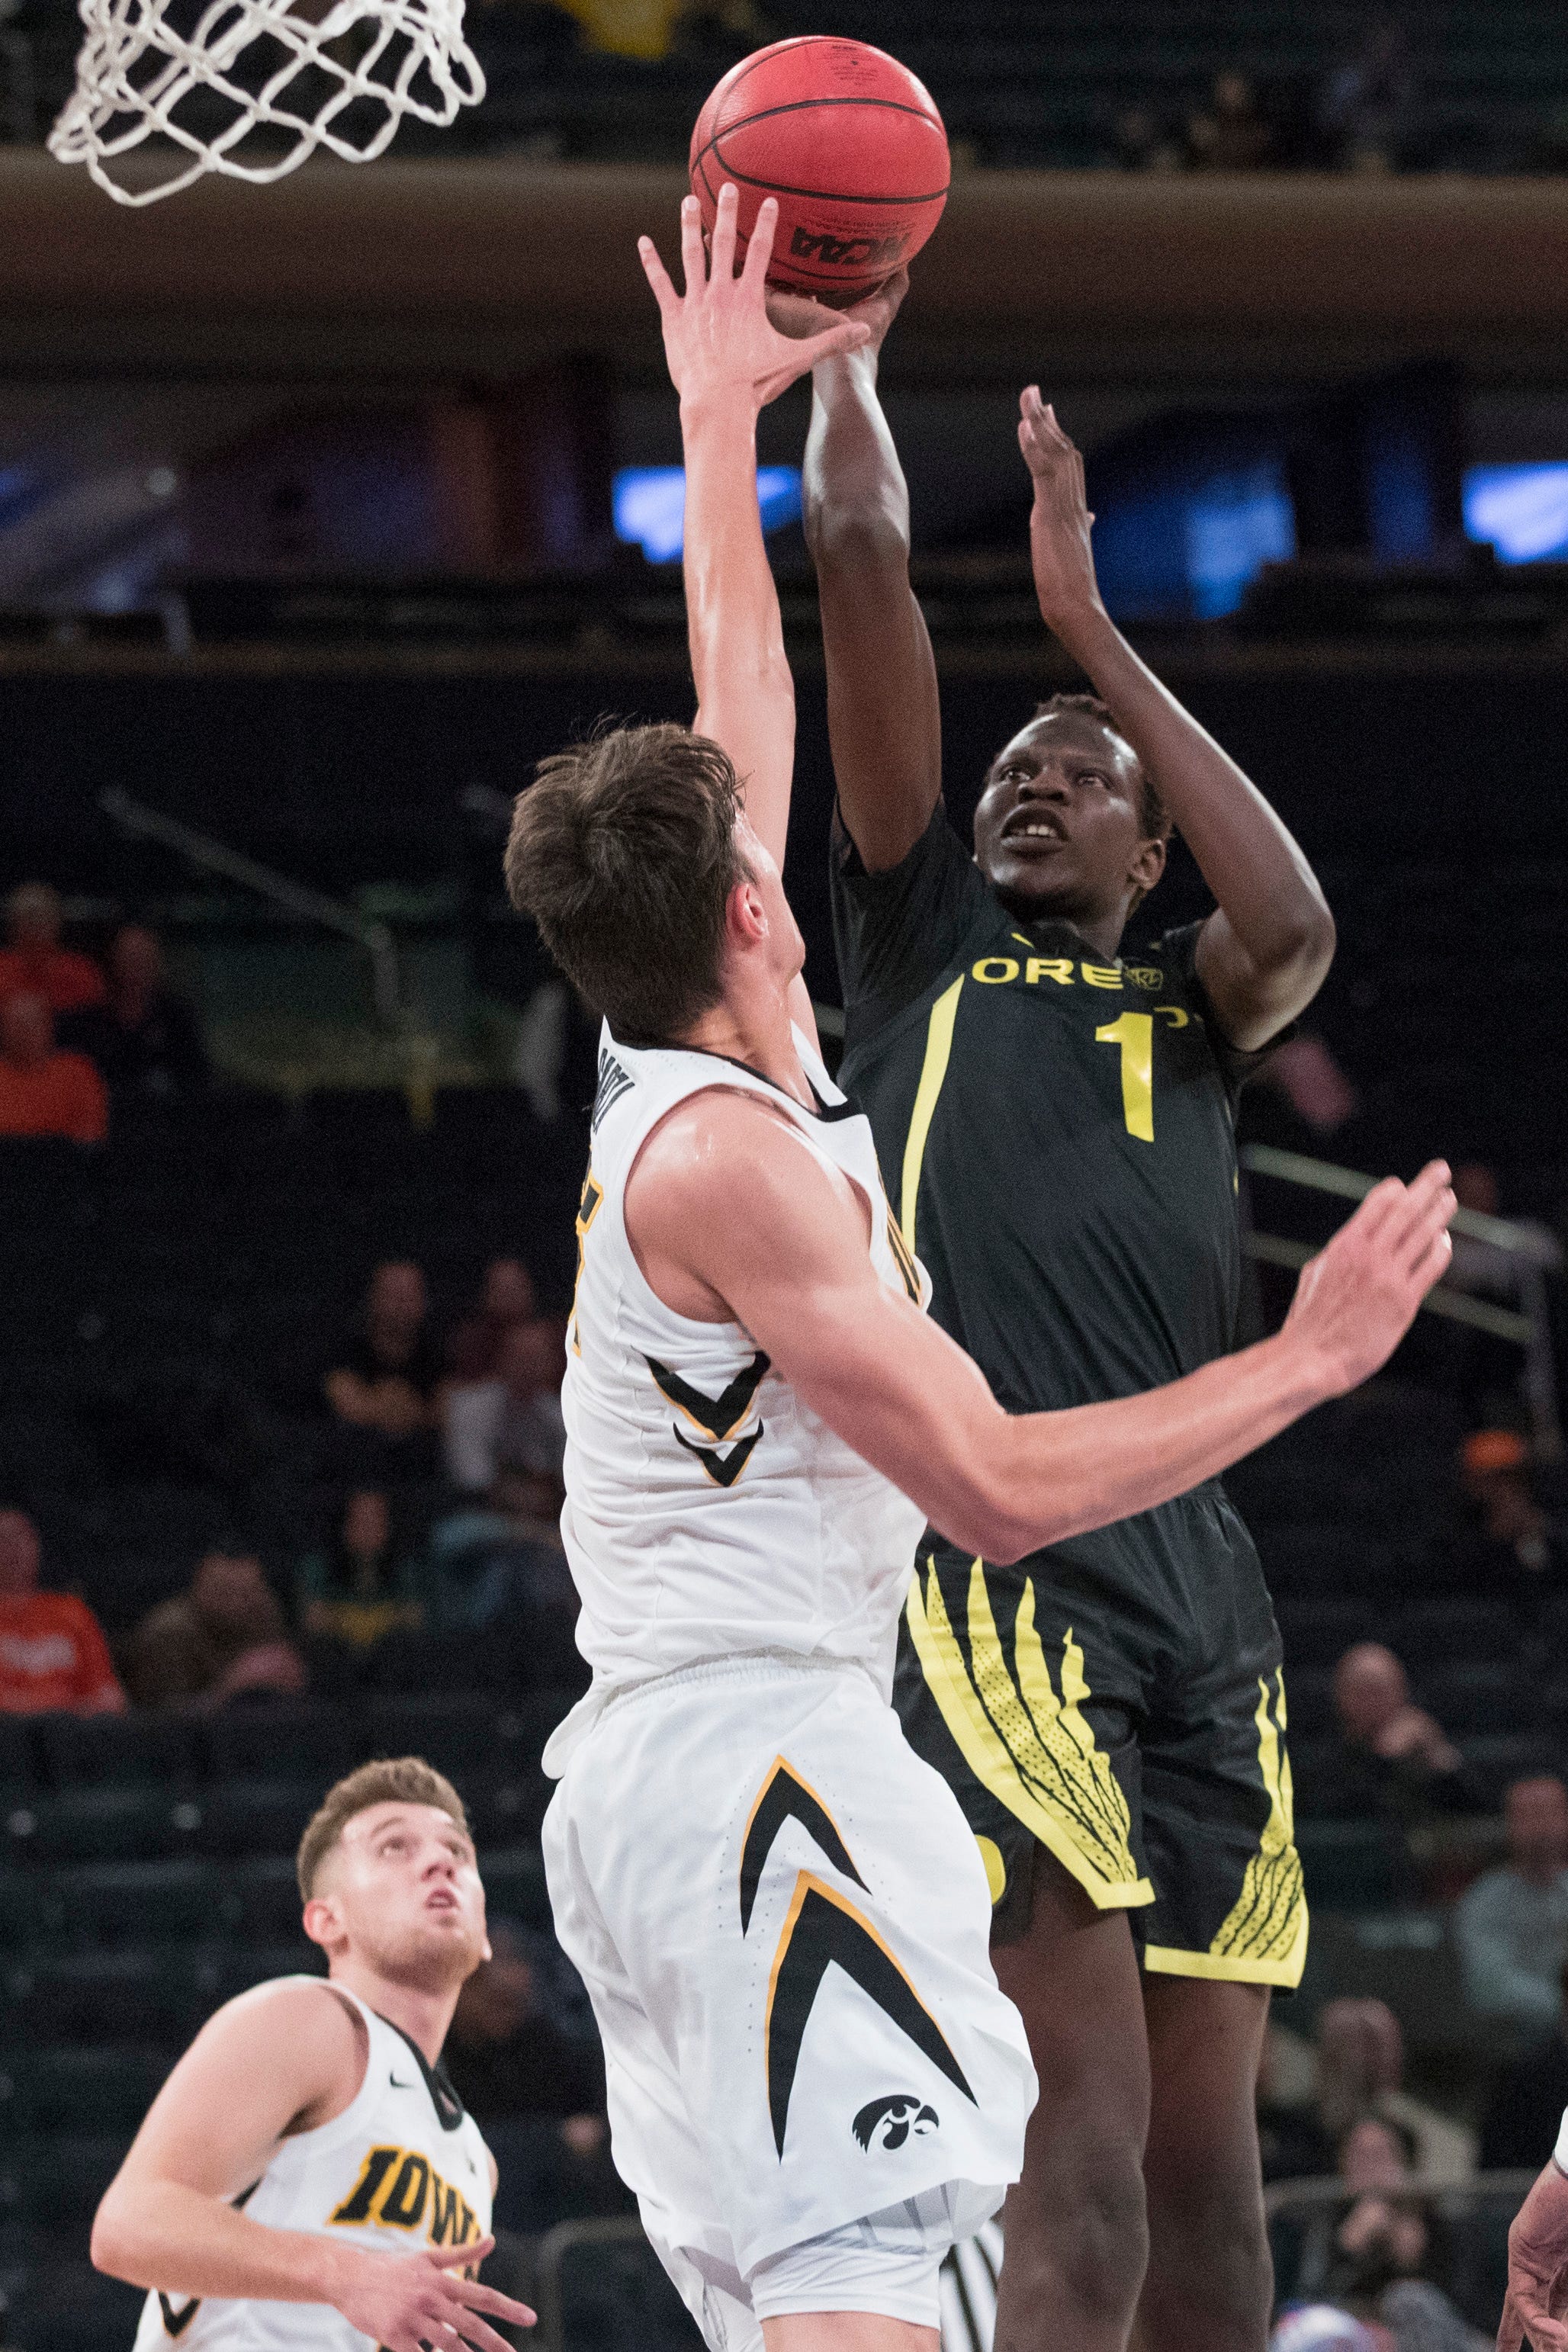 20. Boston Celtics: Bol Bol, center, Oregon. Bol has the talent to go in the top 10, but with so many teams looking for forwards, he could fall some. With three picks, the Celtics can take a gamble on him, though he just had a small sample size of games at Oregon. If things pan out, they will have hit another lottery jackpot.